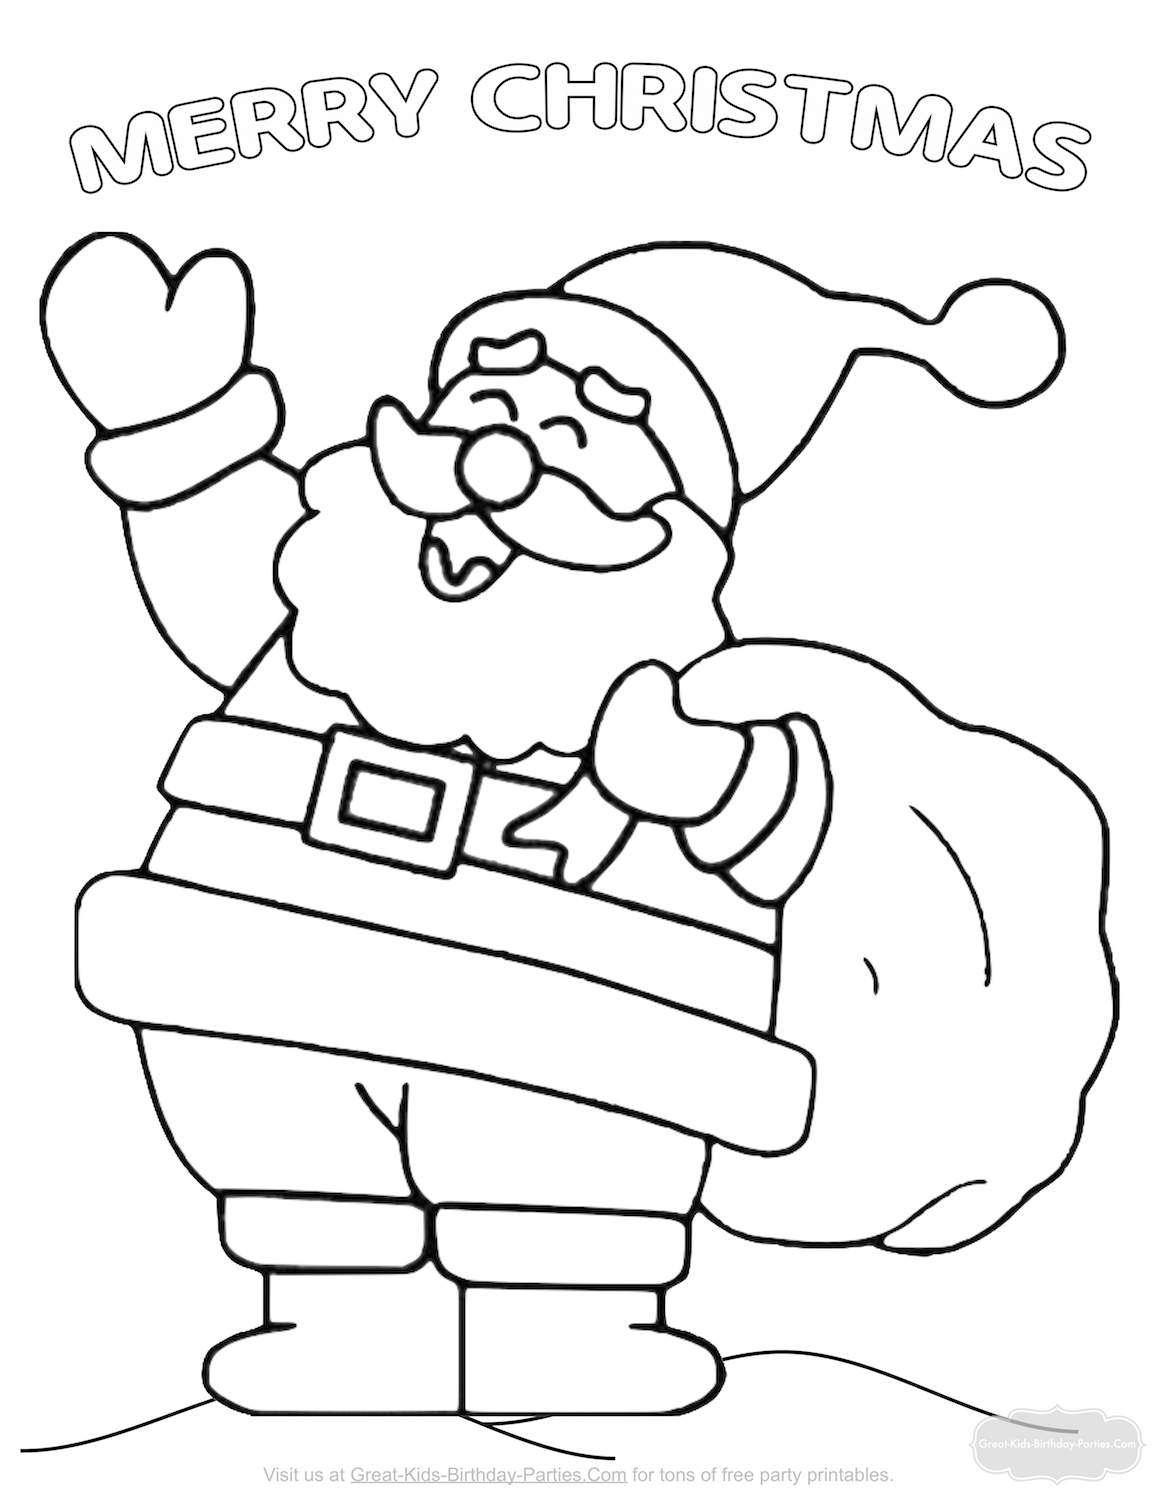 Coloring Pages Santa Santa Coloring Pages With Good Santa Coloring Page 1 Coloring Paged